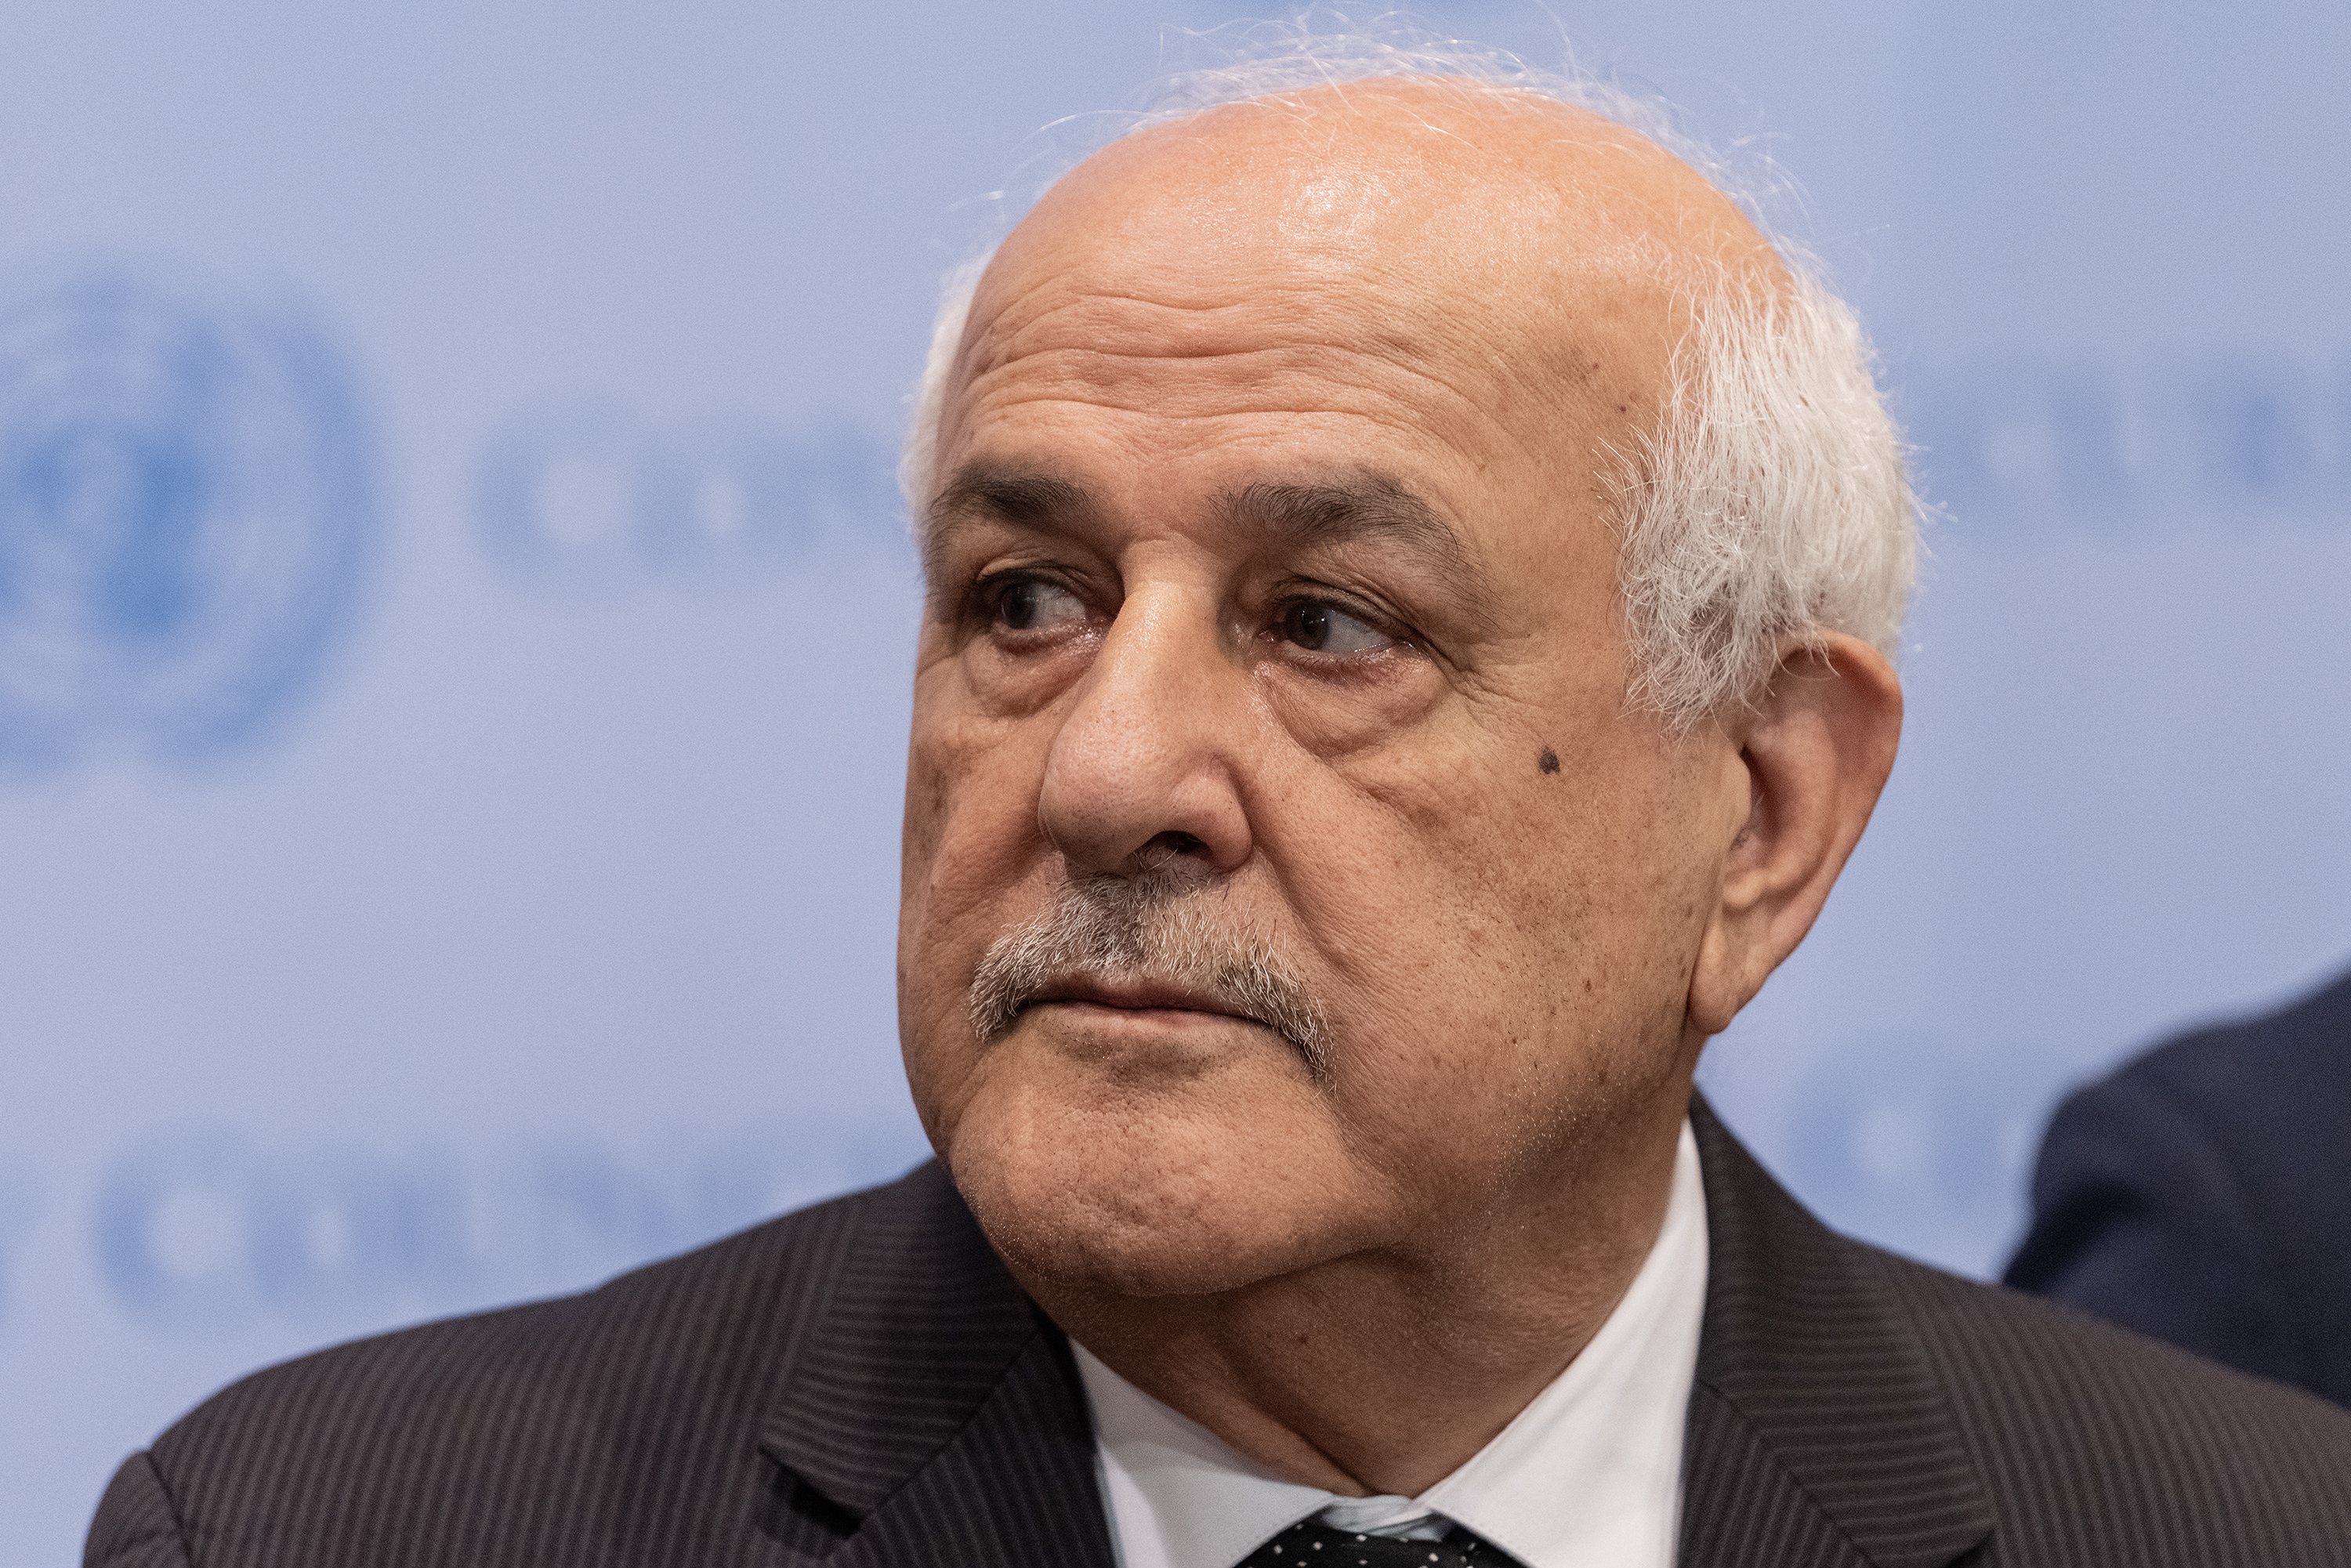 Riyad Mansour speaks at the UN Headquarters on October 27.